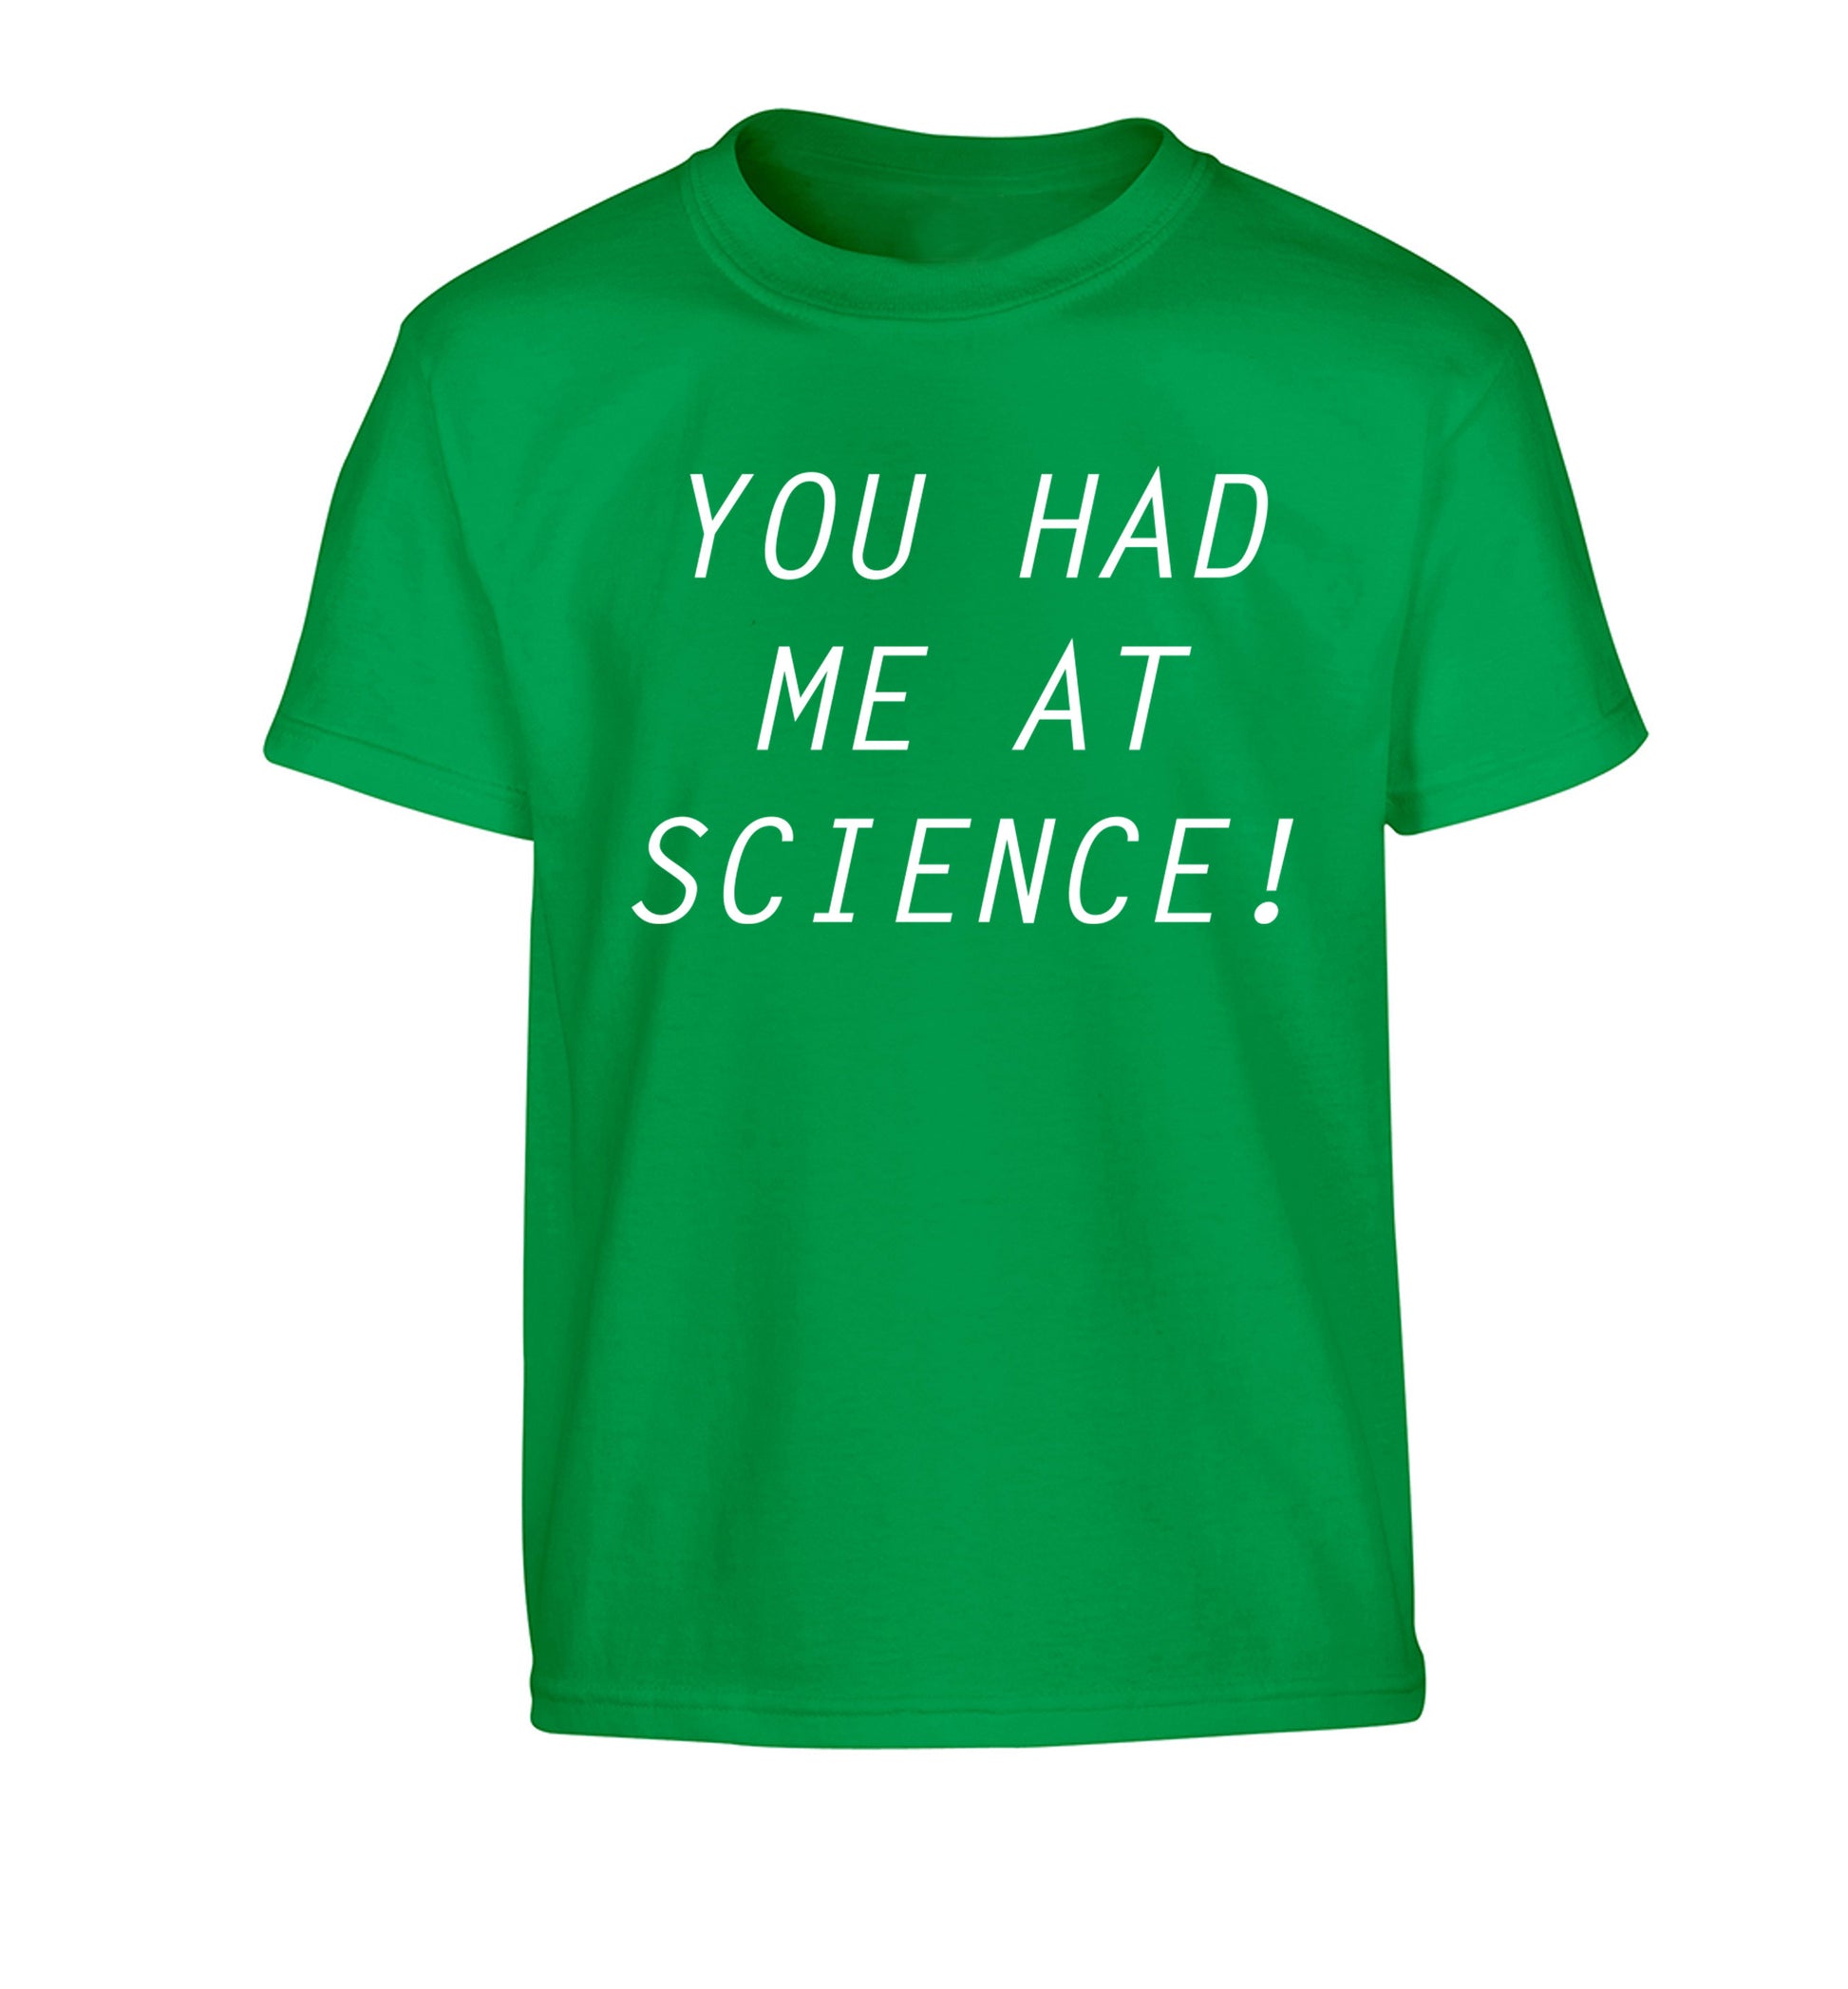 You had me at science Children's green Tshirt 12-14 Years